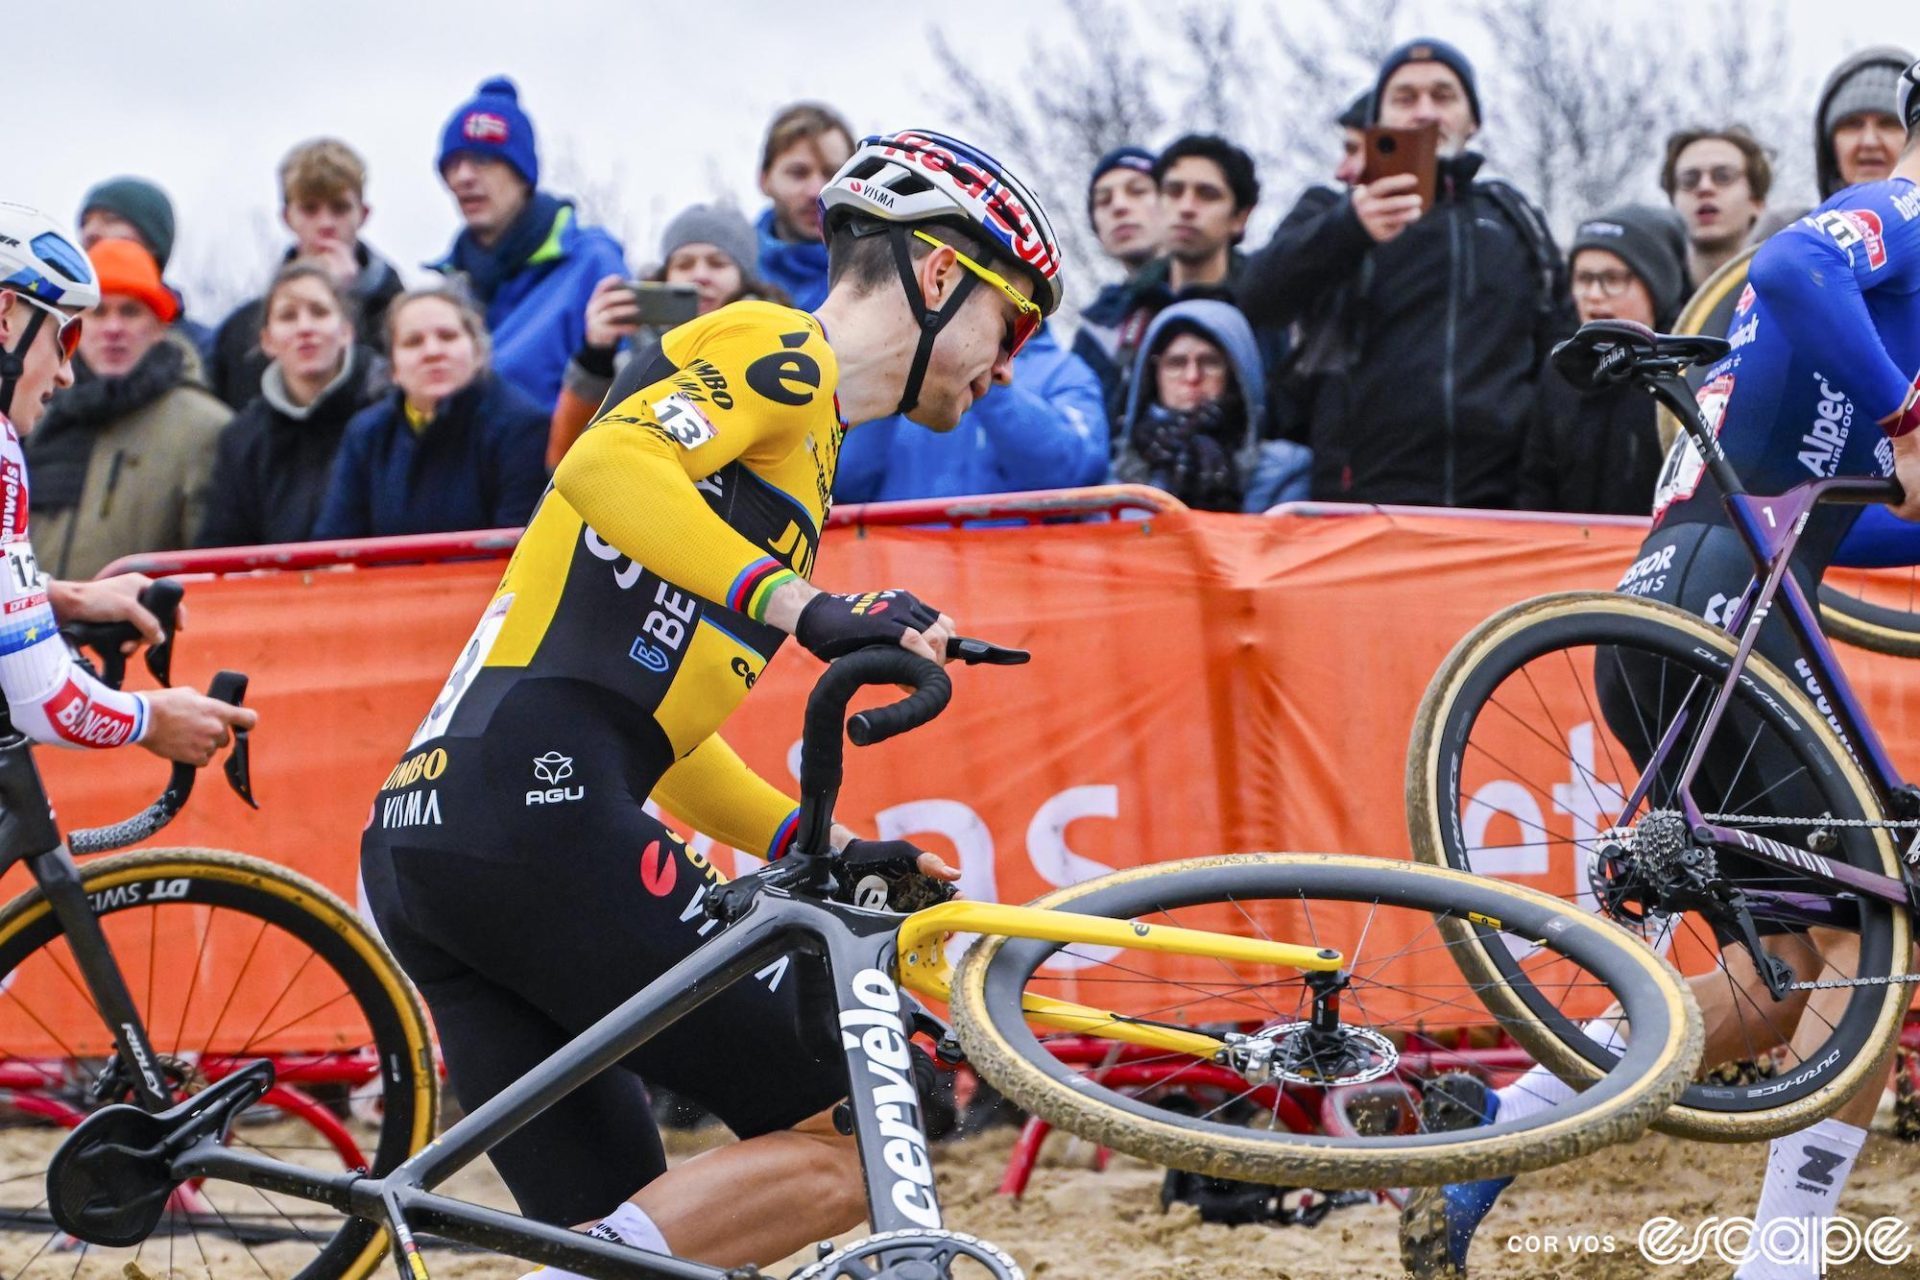 Wout van Aert fights his bike and traffic in the sand at Antwerp.